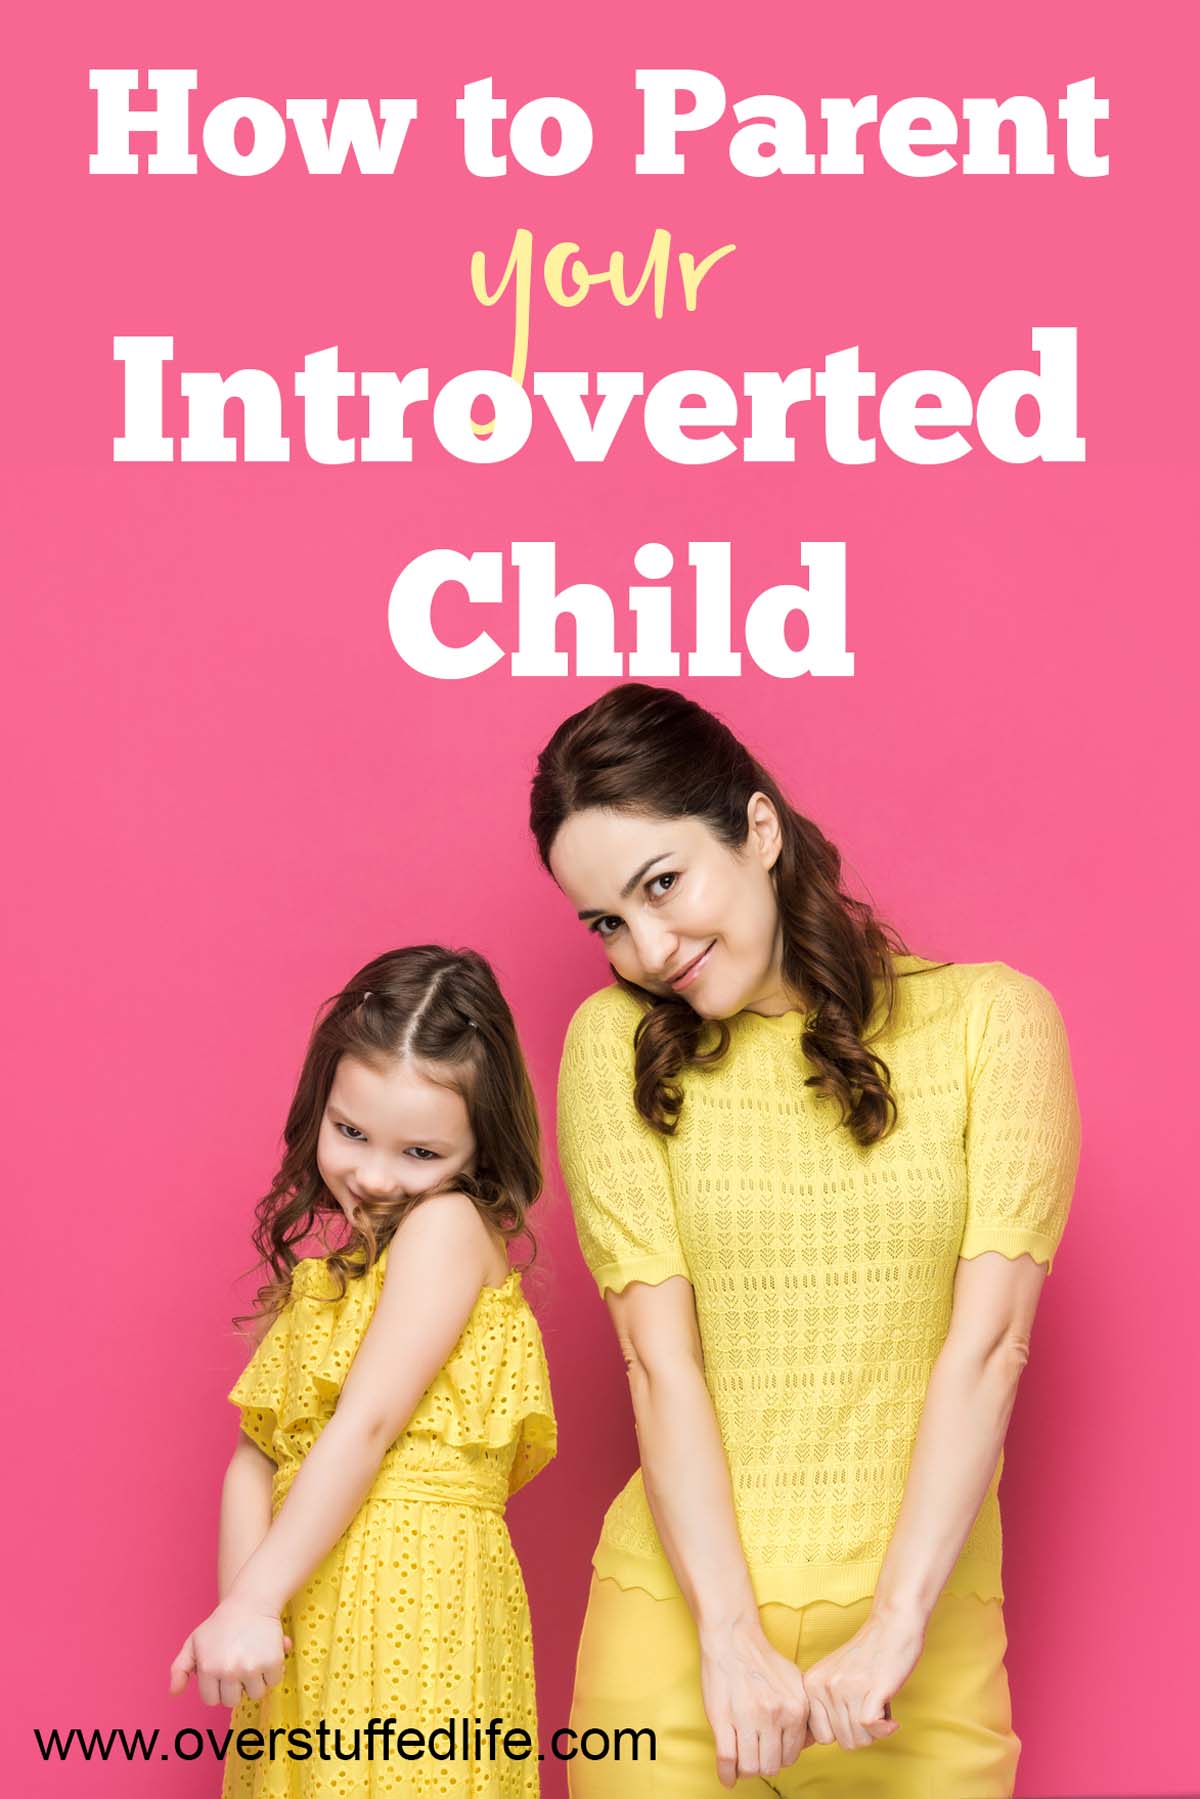 Do you have an introverted child who struggles when meeting new people or with social interaction in general? Sometimes parents aren't sure how to best support their introverted children, especially if they are not introverted themselves. via @lara_neves